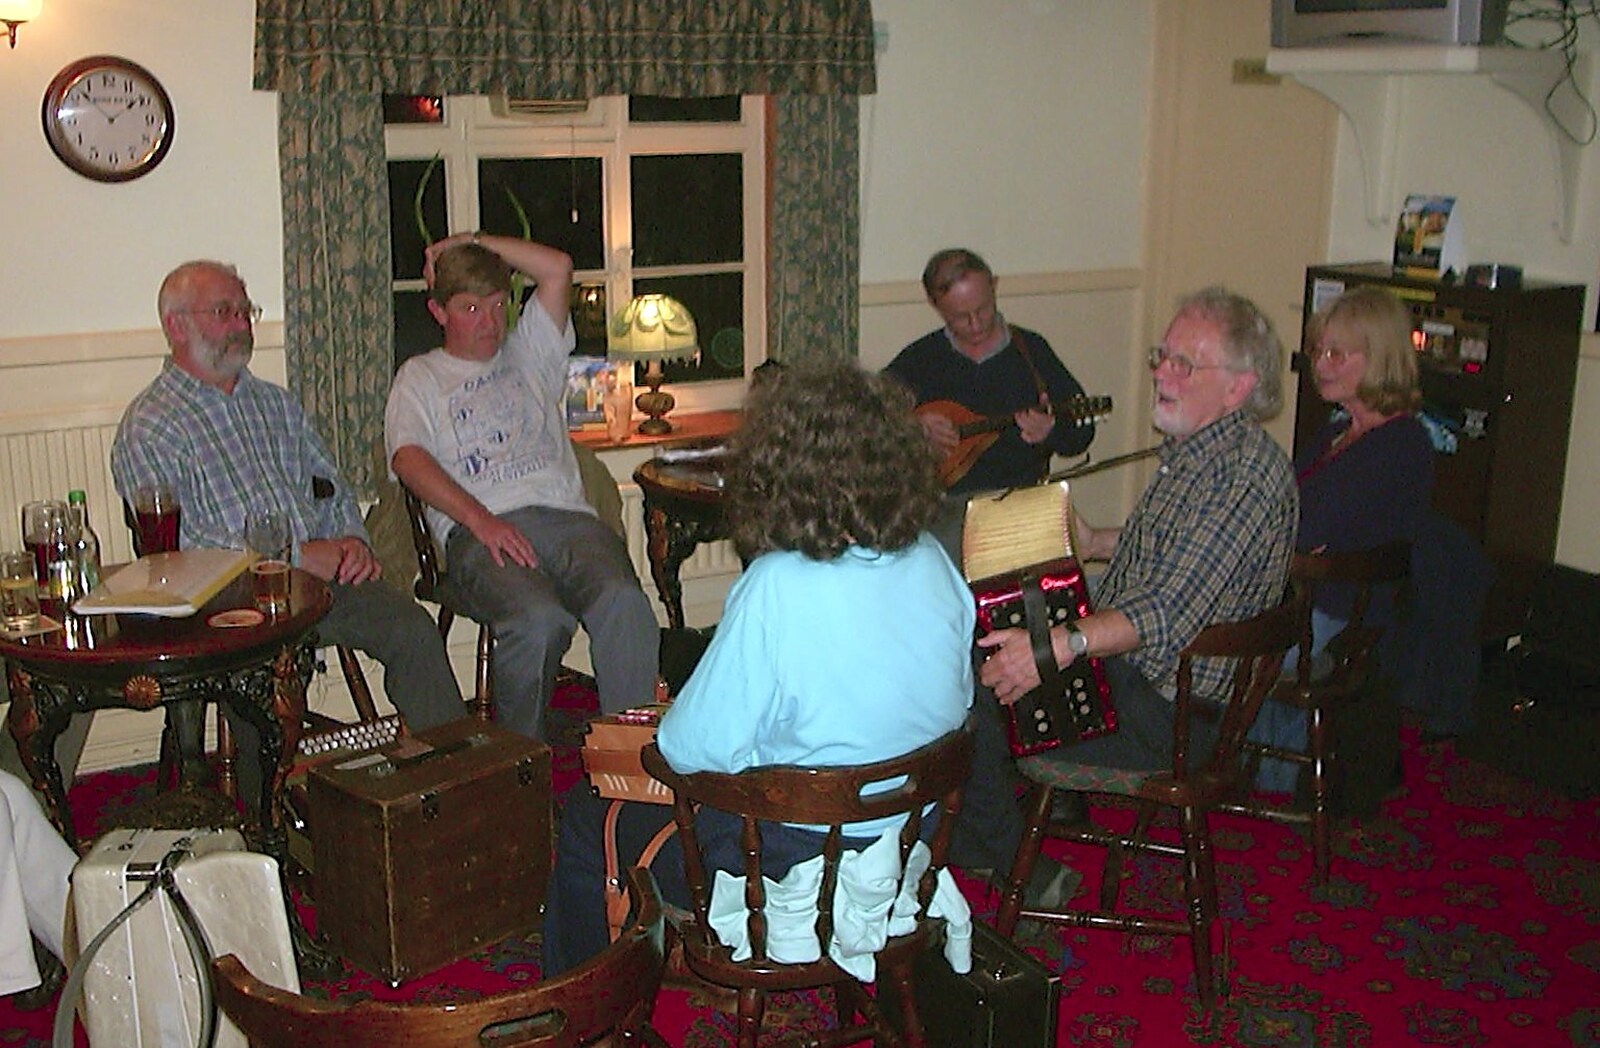 The BBs do a Wedding Gig and the BSCC go Sheep Rustling, Gislingham and Redgrave, Suffolk - 10th July 2004: The folk band